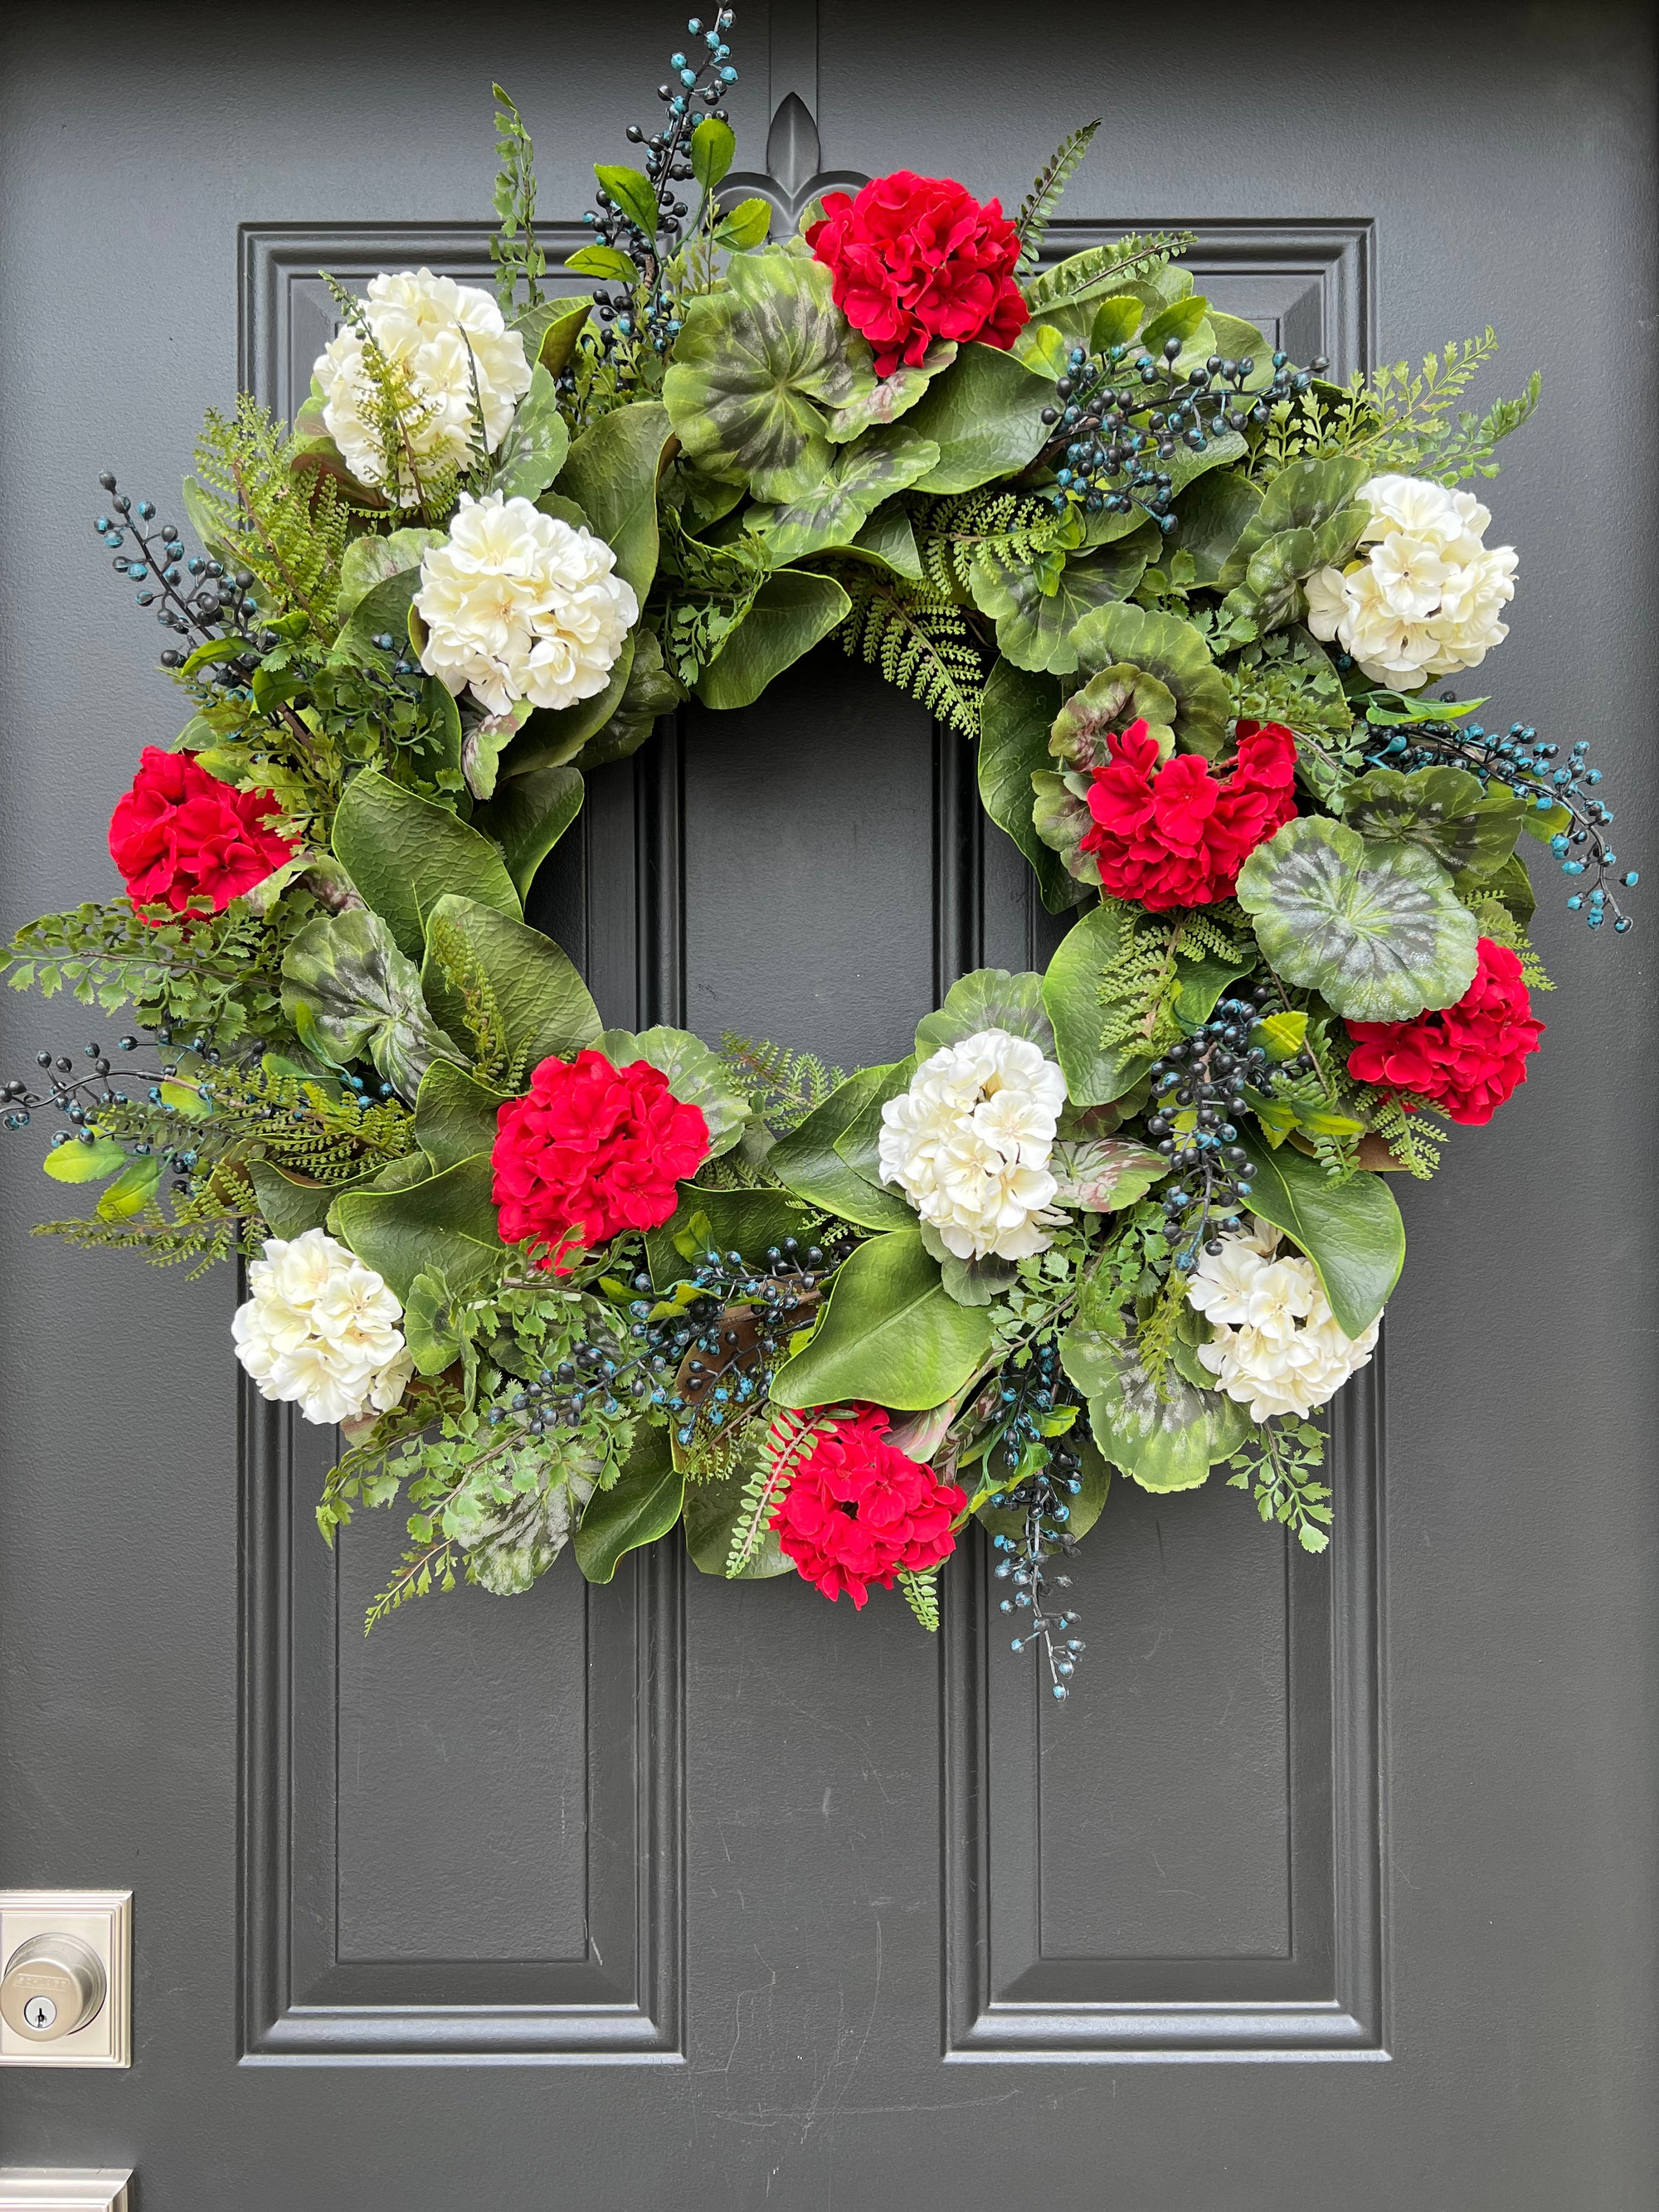 Red and white geranium with blueberries wreath